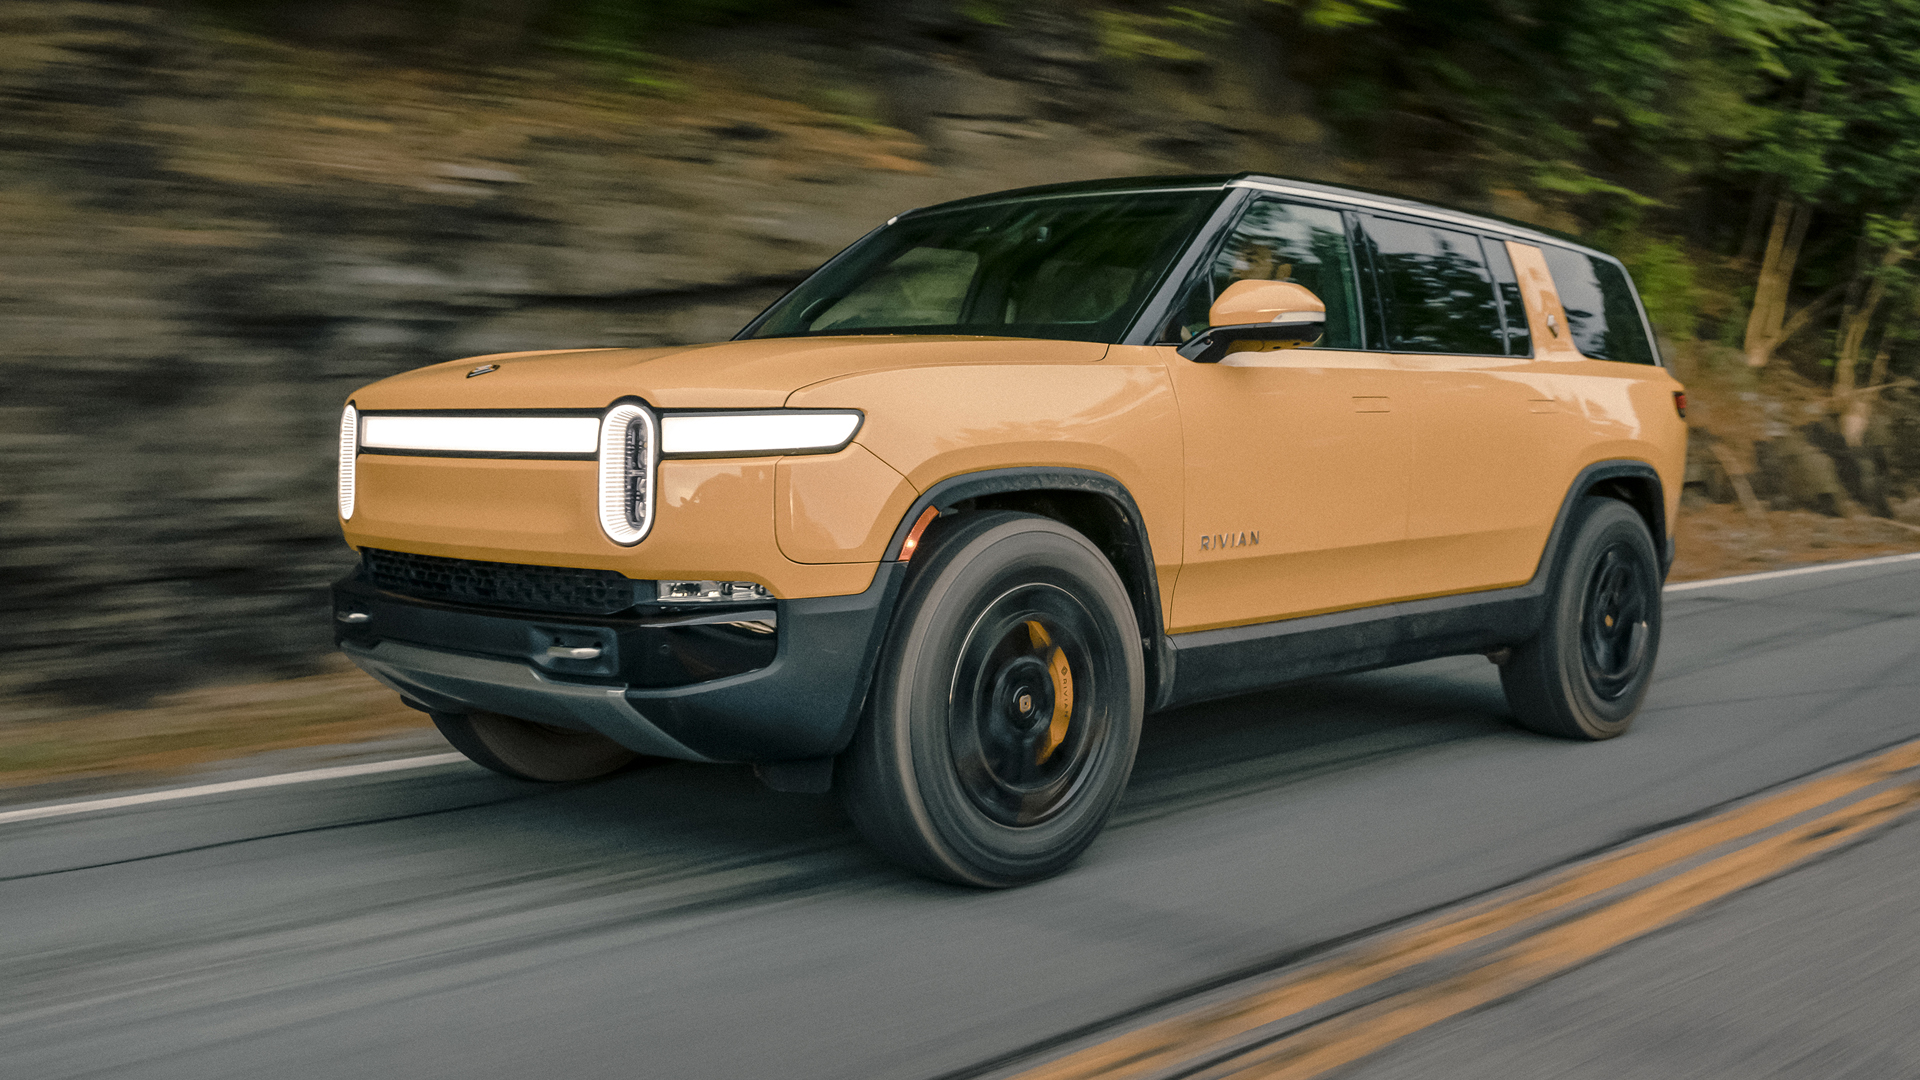 Rivian R1S First Drive Review The SUV finally arrives! (Sort of